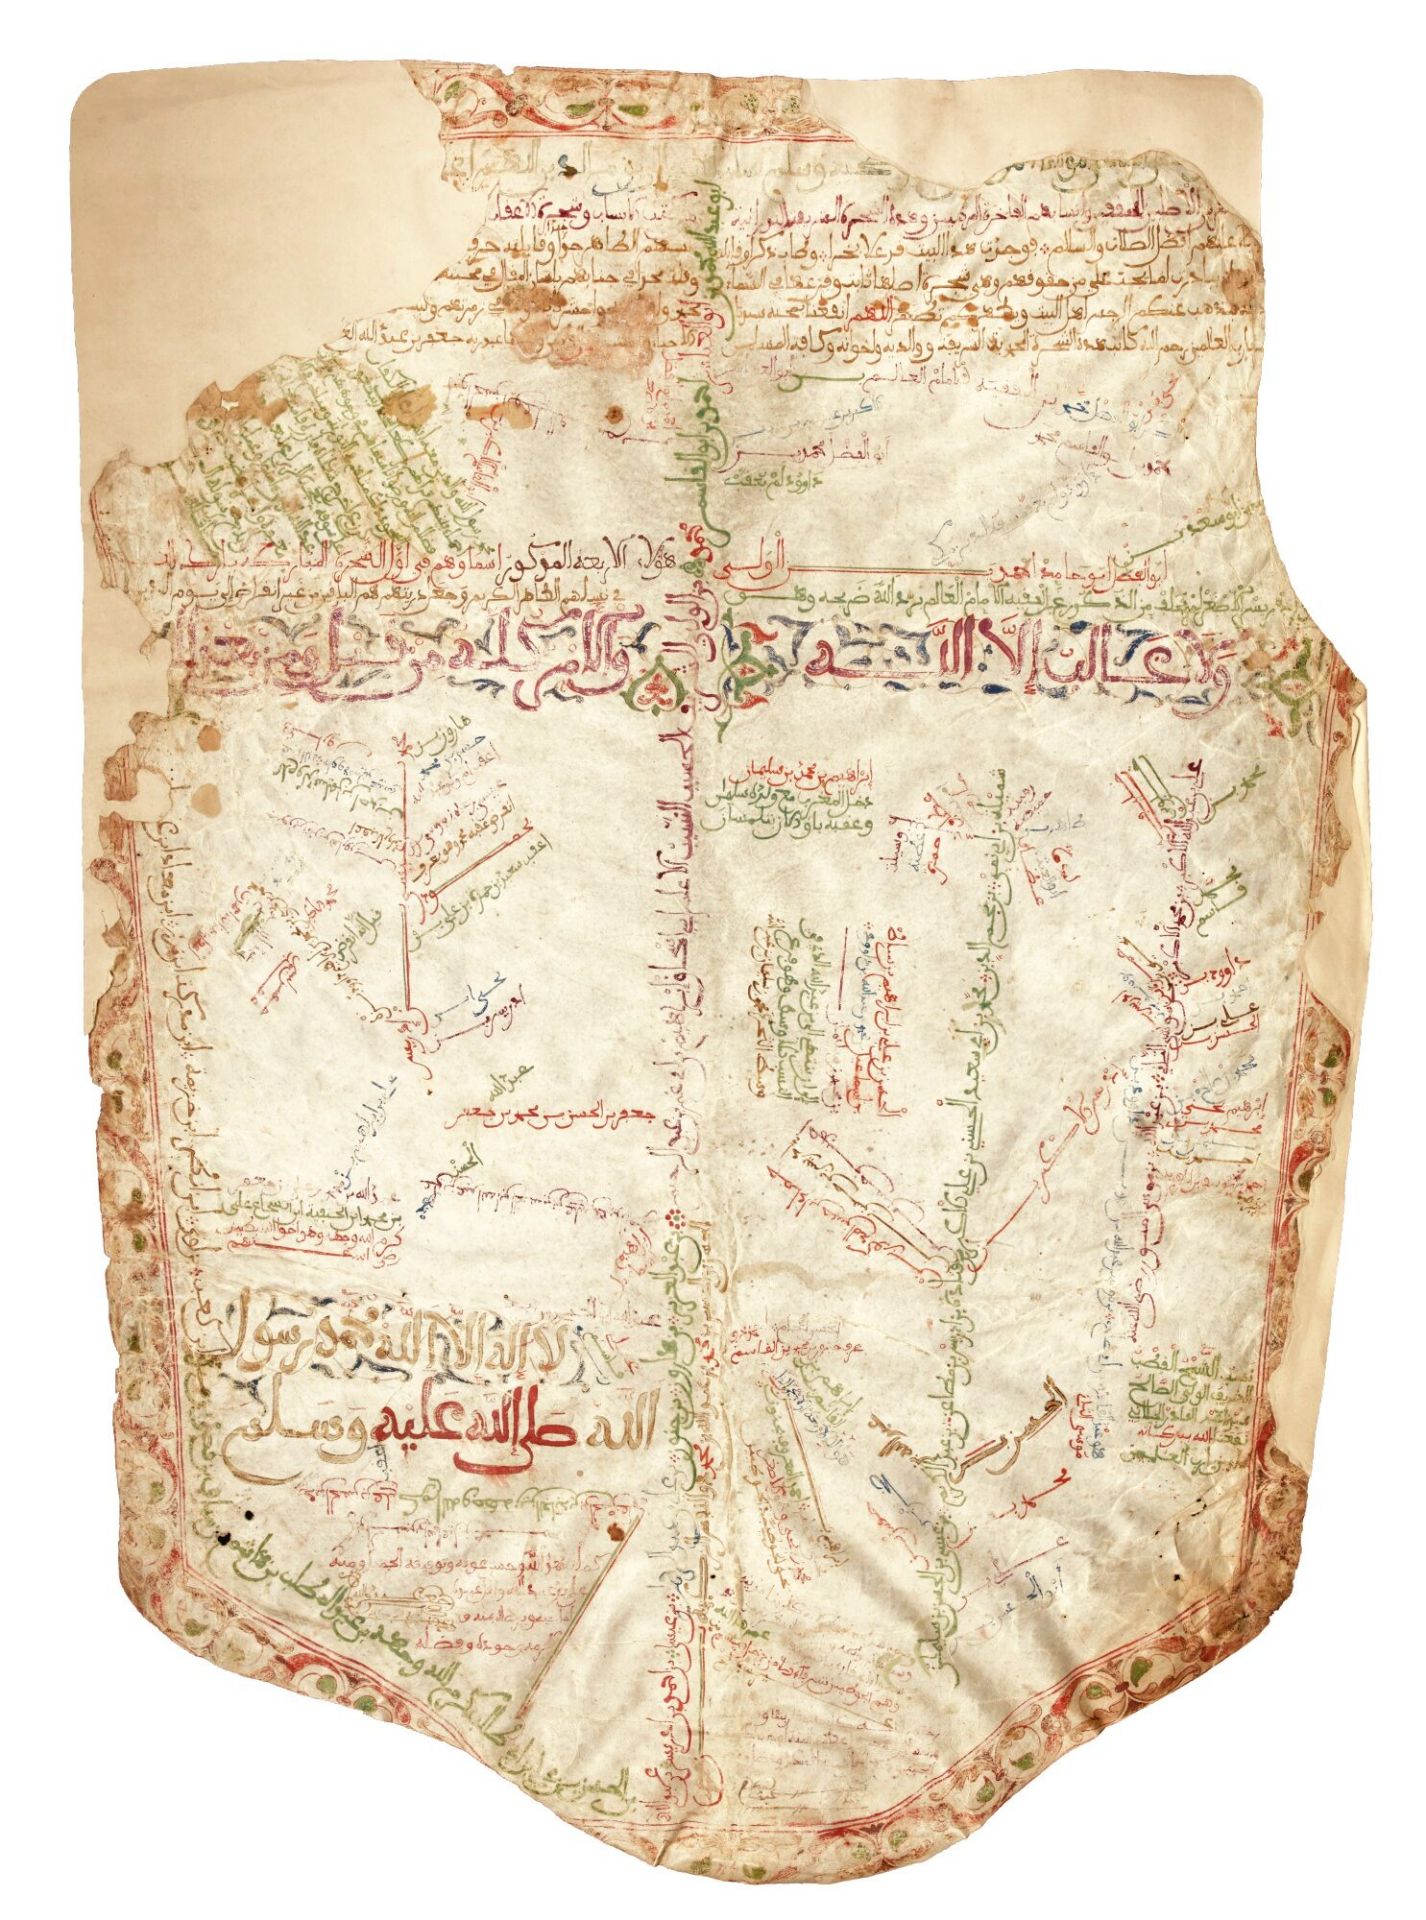 A BANNER-SHAPED GENEALOGY ON VELLUM, NORTH AFRICA, 16TH-17TH CENTURY